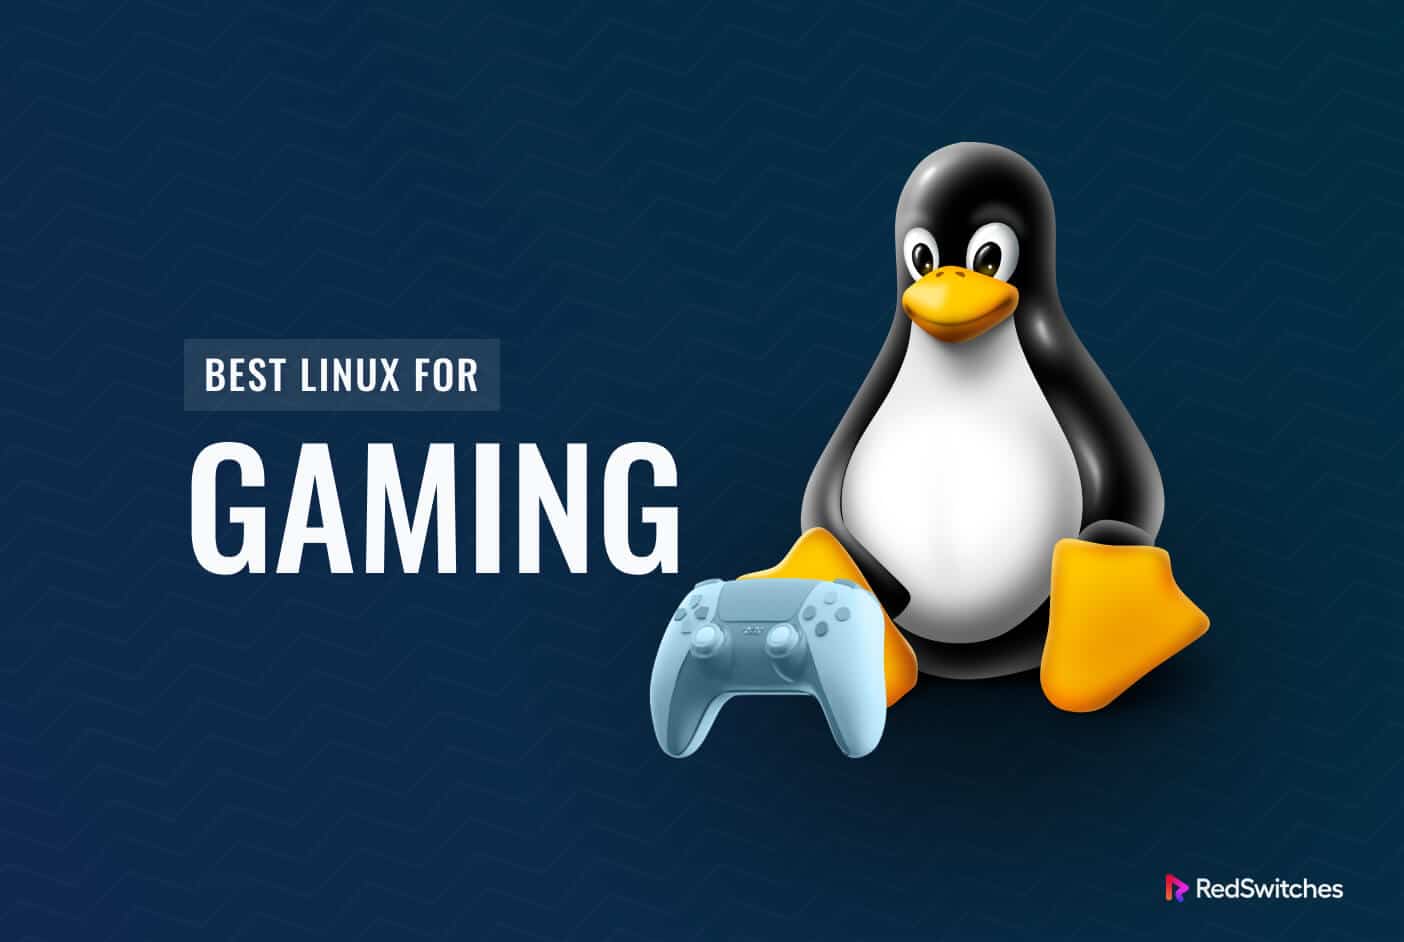 Would You Like to Play a Linux Game?